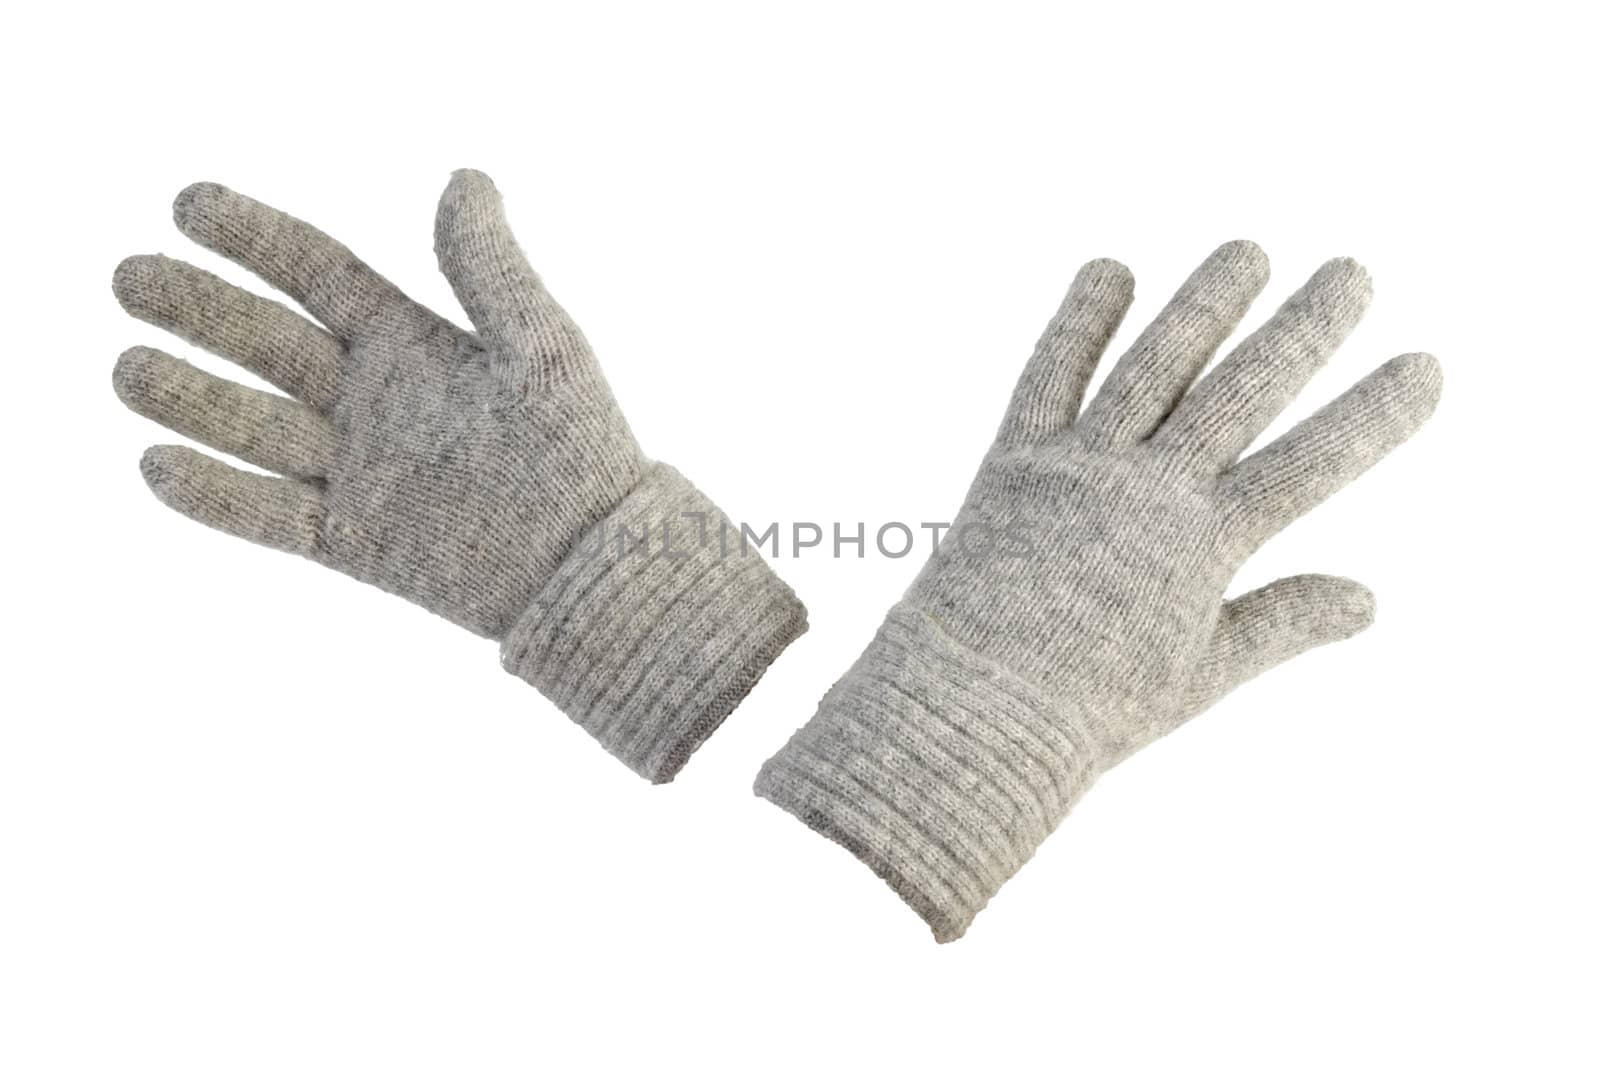 Female grey gloves made of wool. Isolated on white background